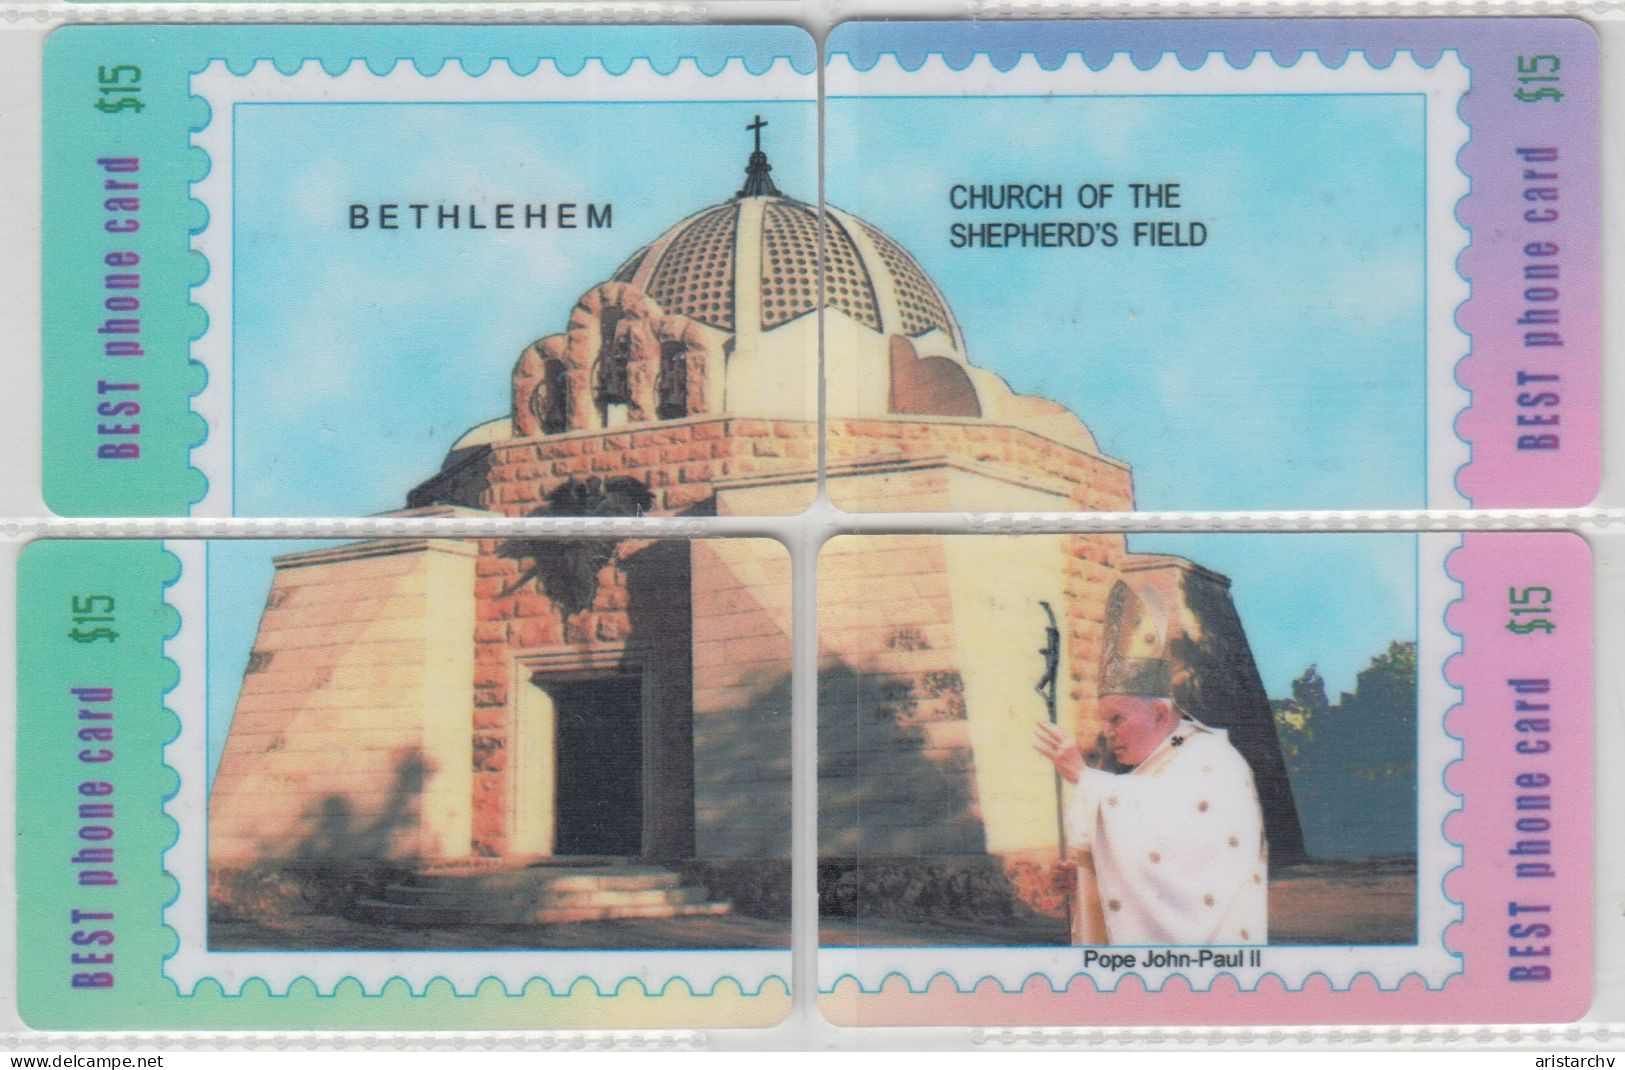 ISRAEL BETHLEHEM CHURCH OF THE SHEPHERD'S FIELD INTERIOR OF THE BASILICA OF THE NATIVITY POPE JOHN PAUL II 2 PUZZLES - Puzzles